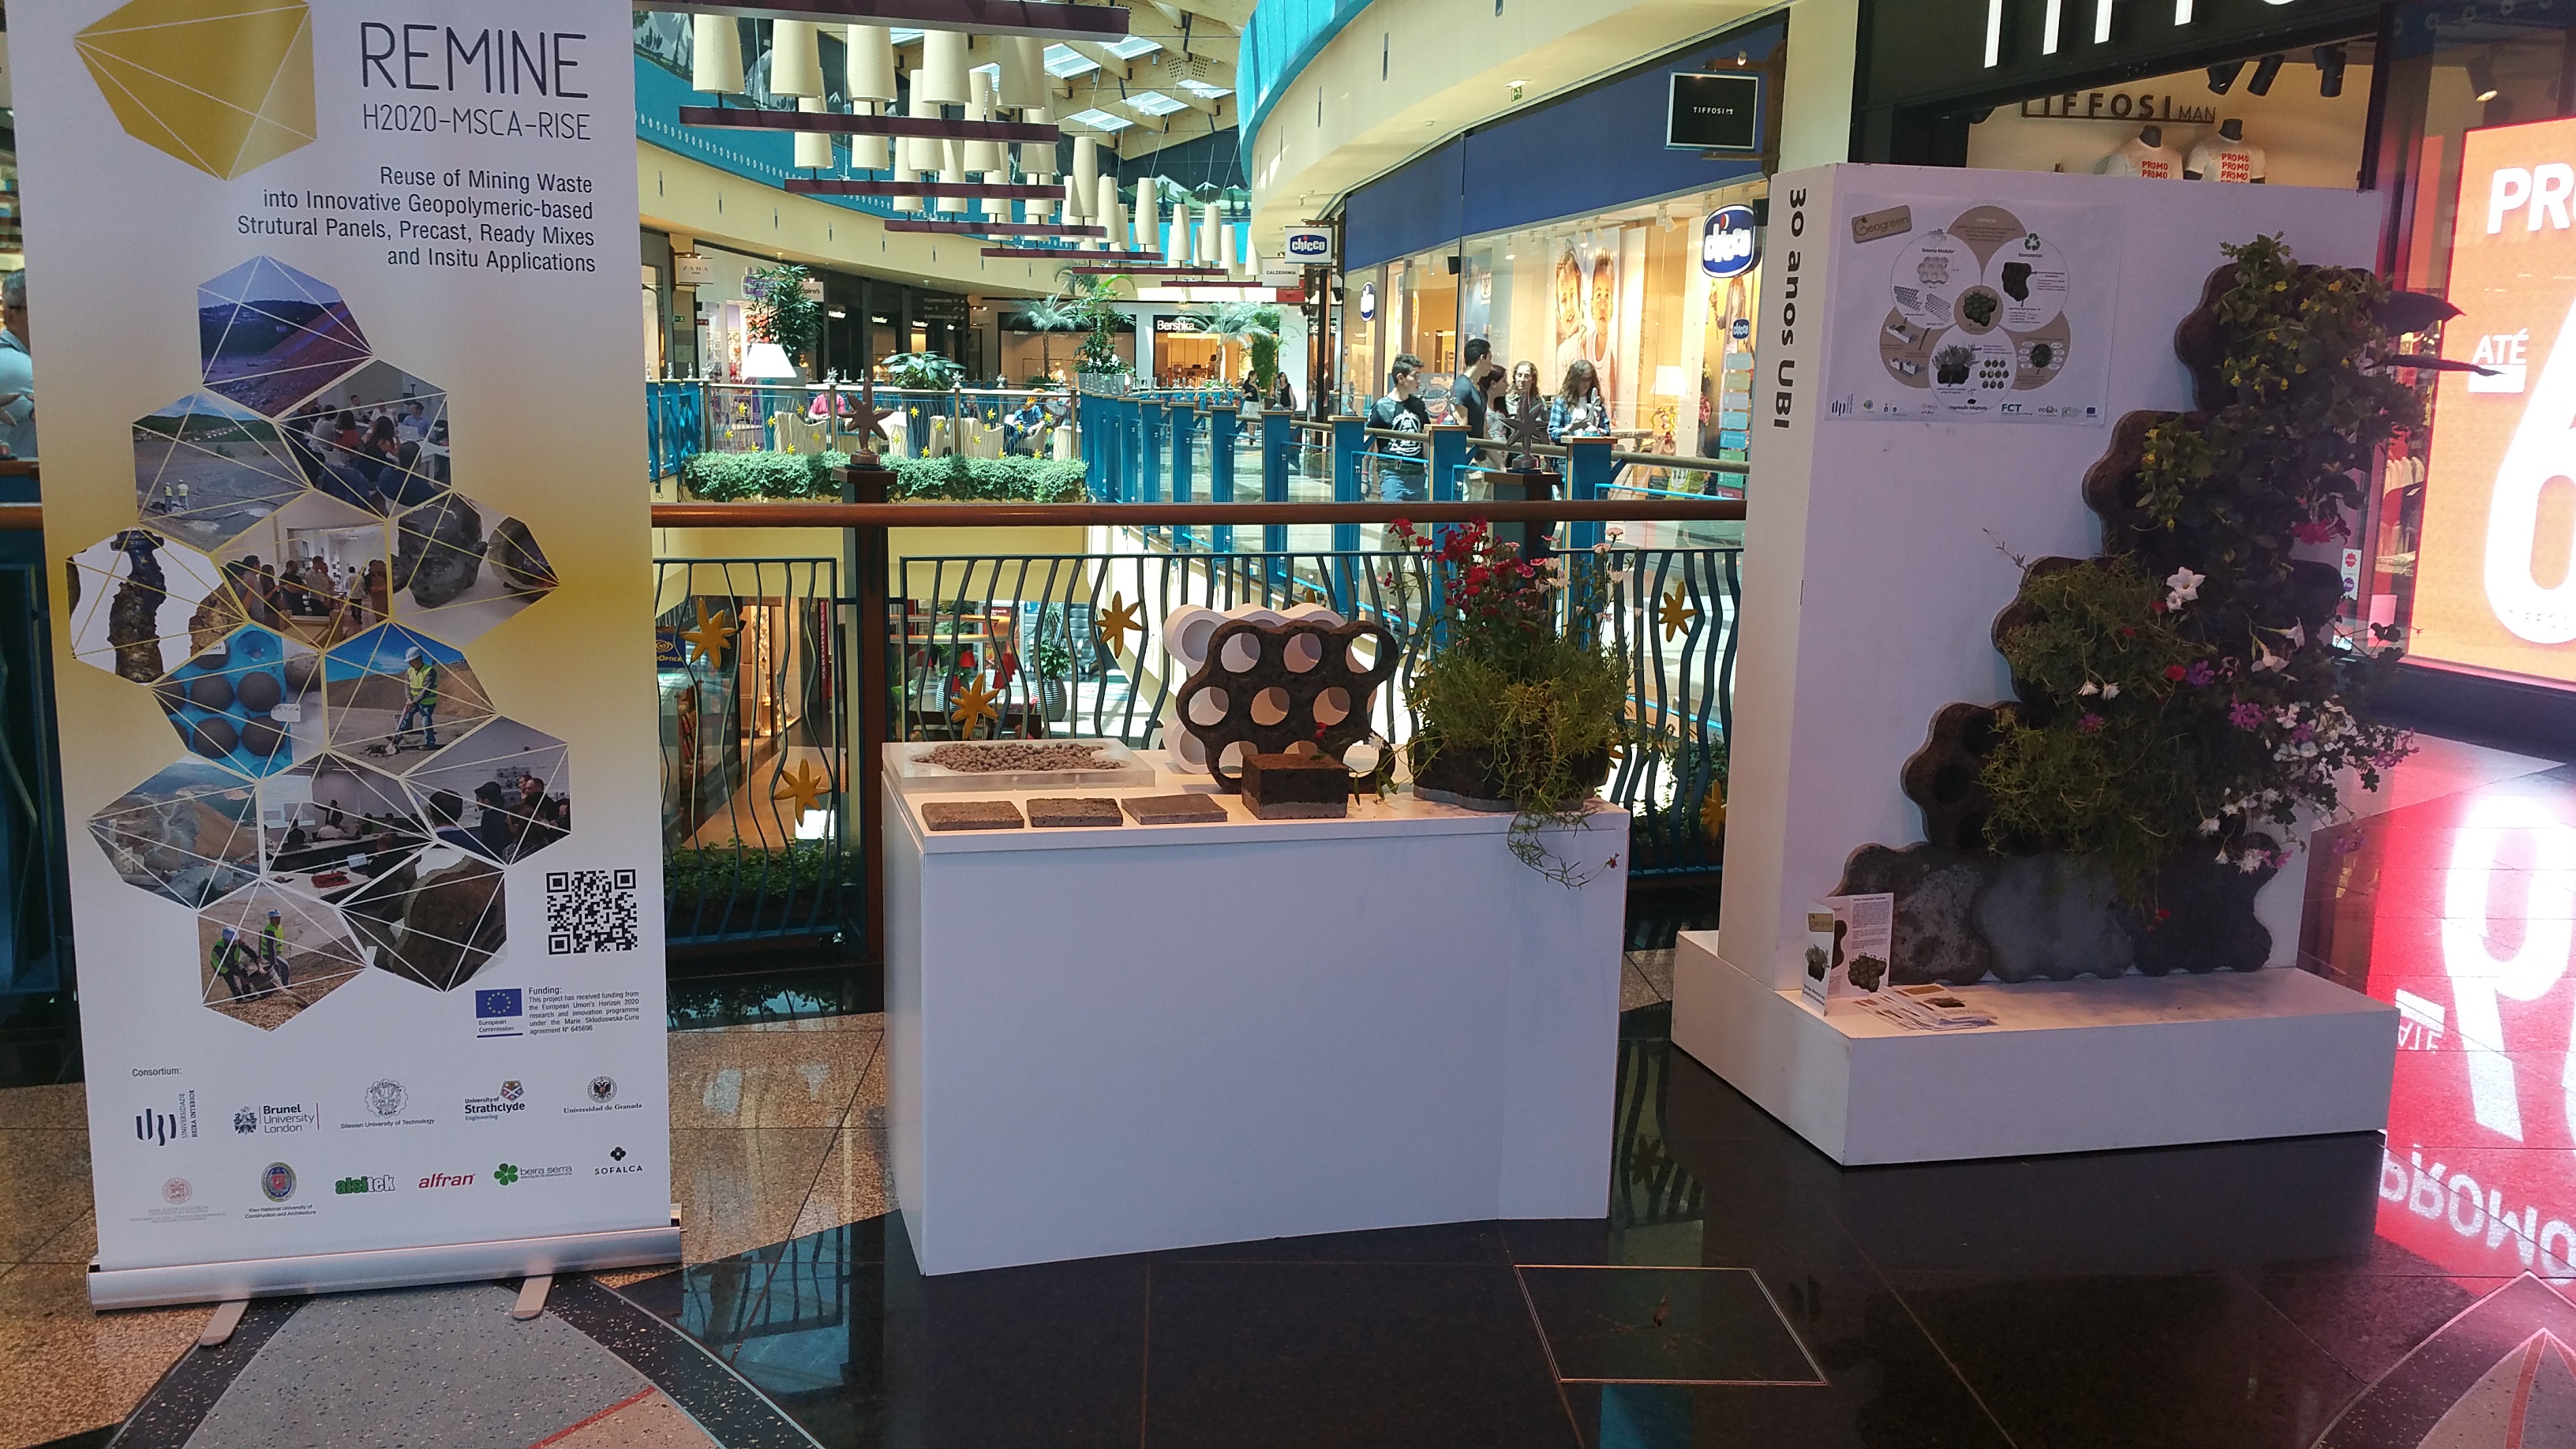 Remine Dissemination In The Ubi S 30 Years Exposition At Serra Shopping Remine